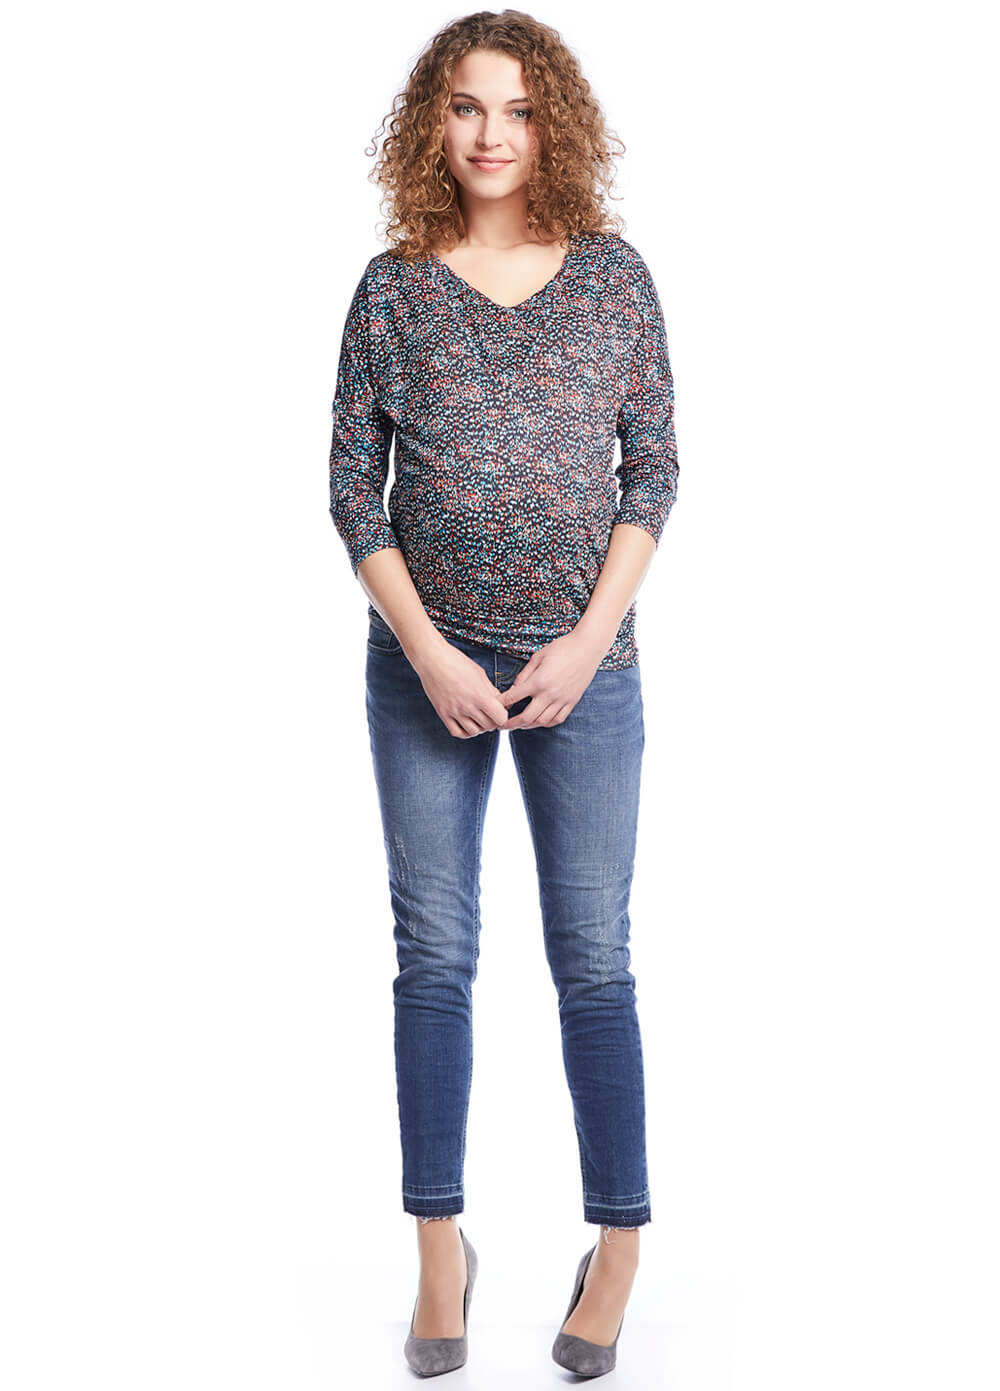 Banded Maternity Nursing Blouse in Blue Print by Queen mum